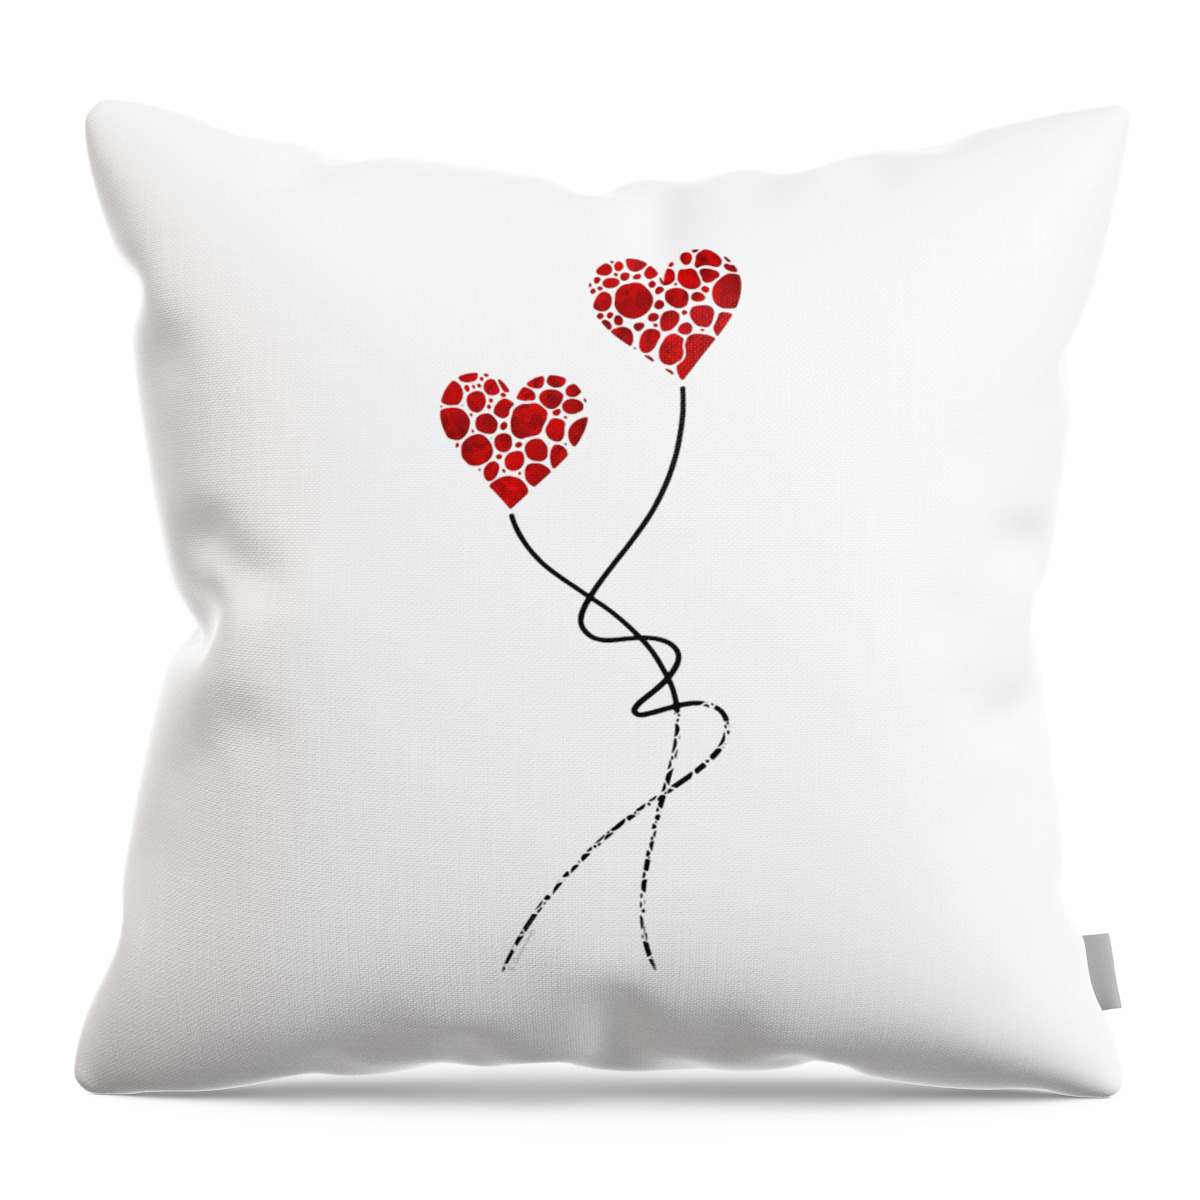 Love Throw Pillow featuring the painting Romantic Art - You Are The One - Sharon Cummings by Sharon Cummings